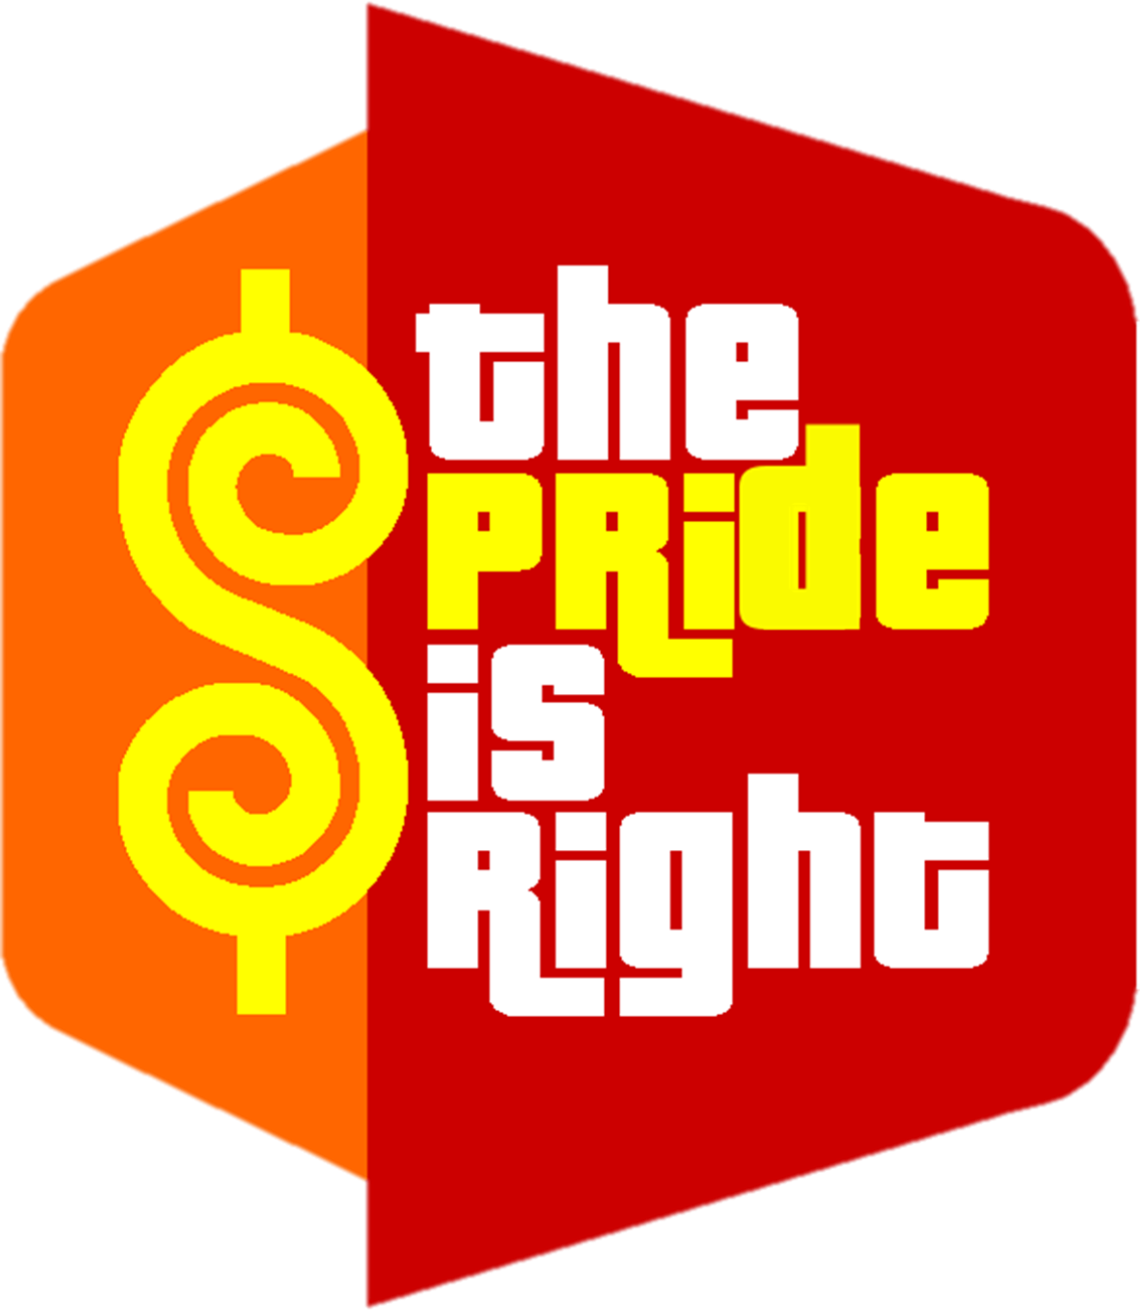 Ticket To Pride - Price Is Right Sign (1140x1311)